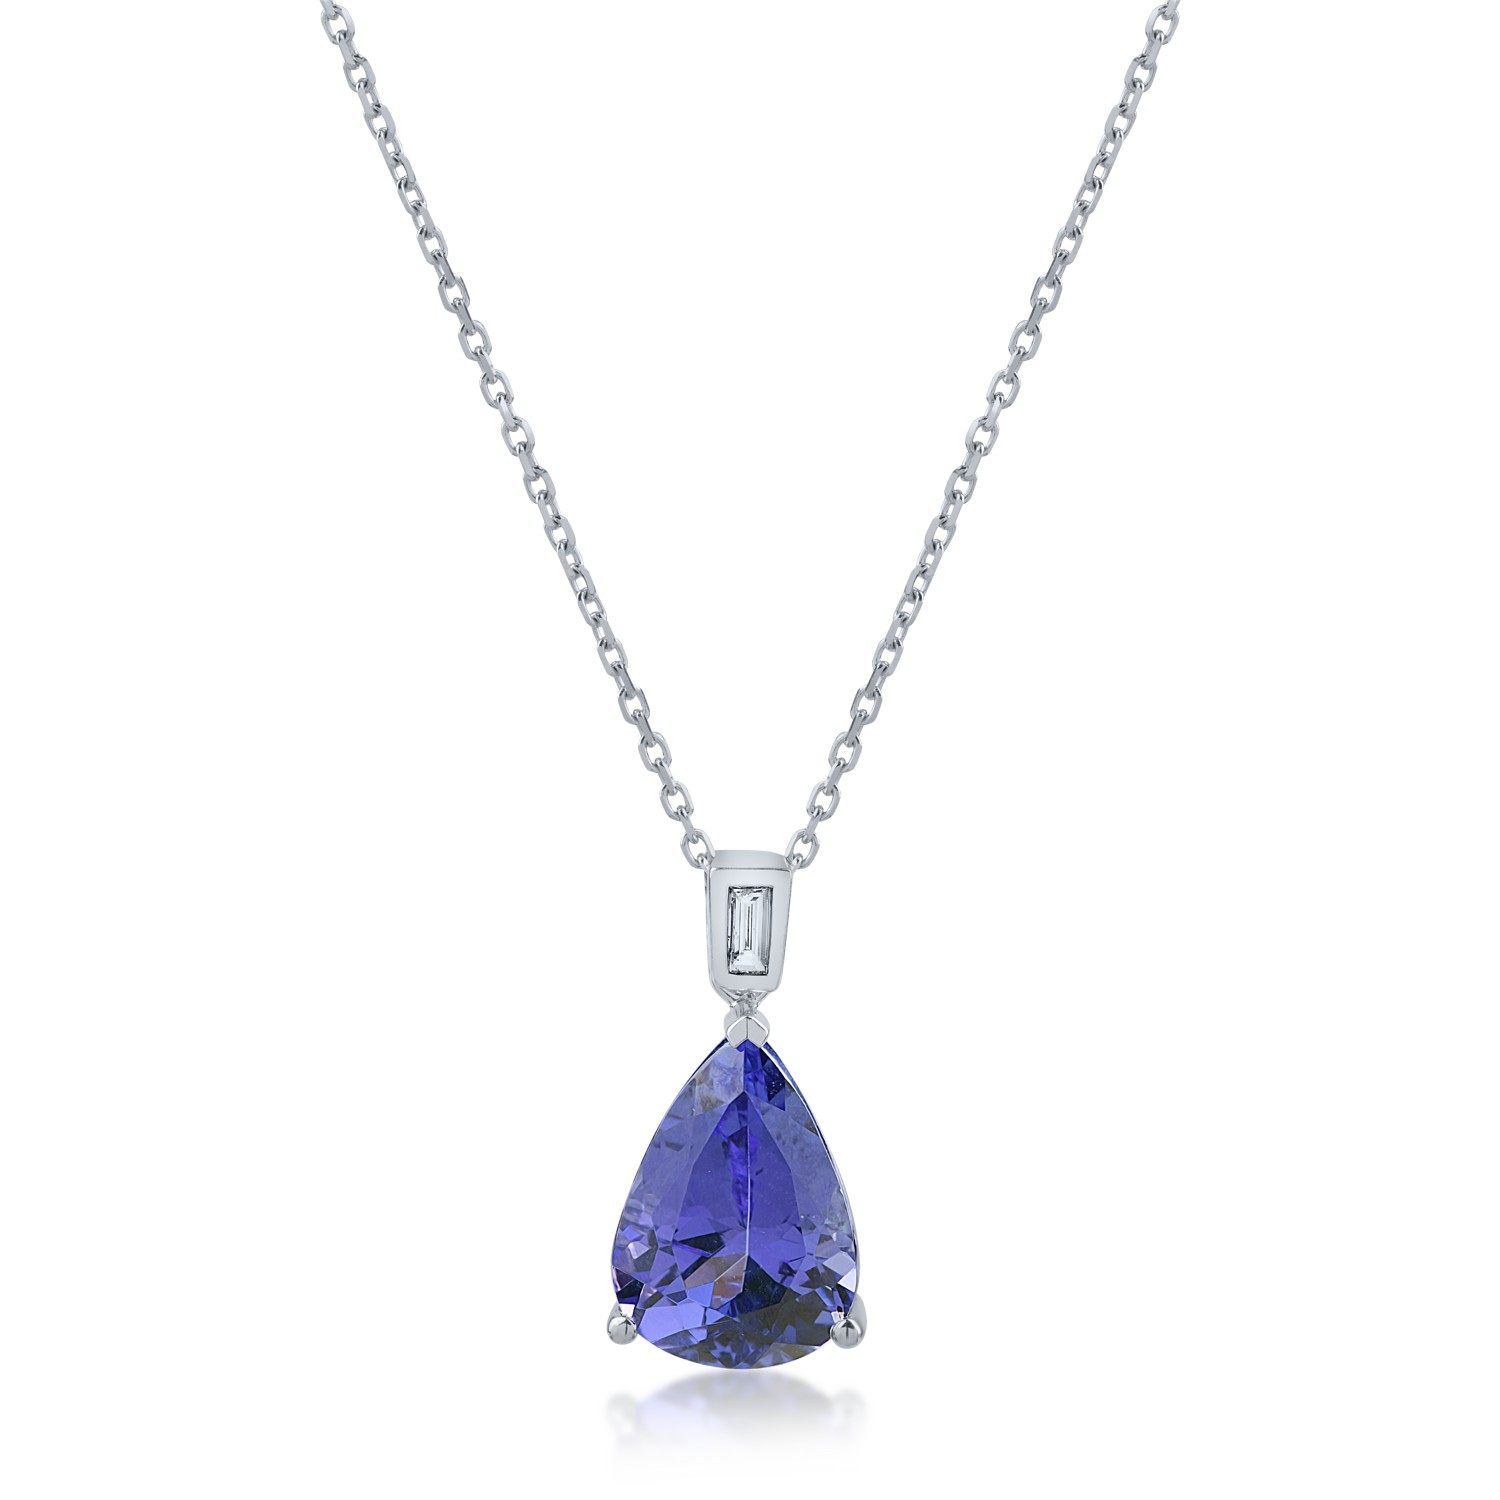 White gold pendant necklace with 3.75ct tanzanite and 0.04ct diamond